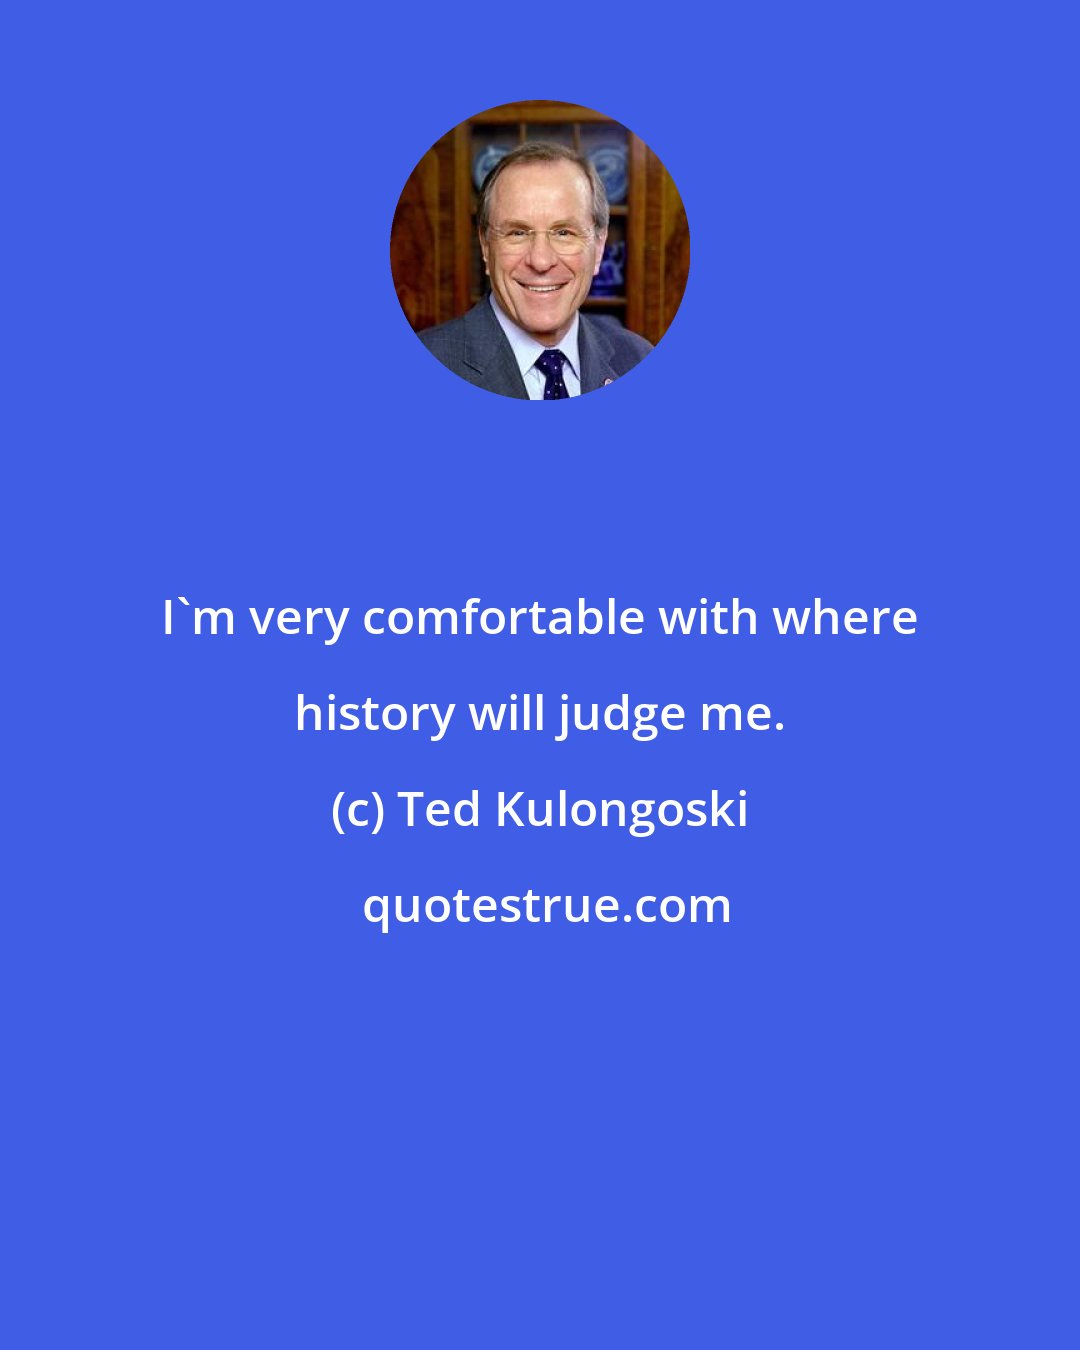 Ted Kulongoski: I'm very comfortable with where history will judge me.